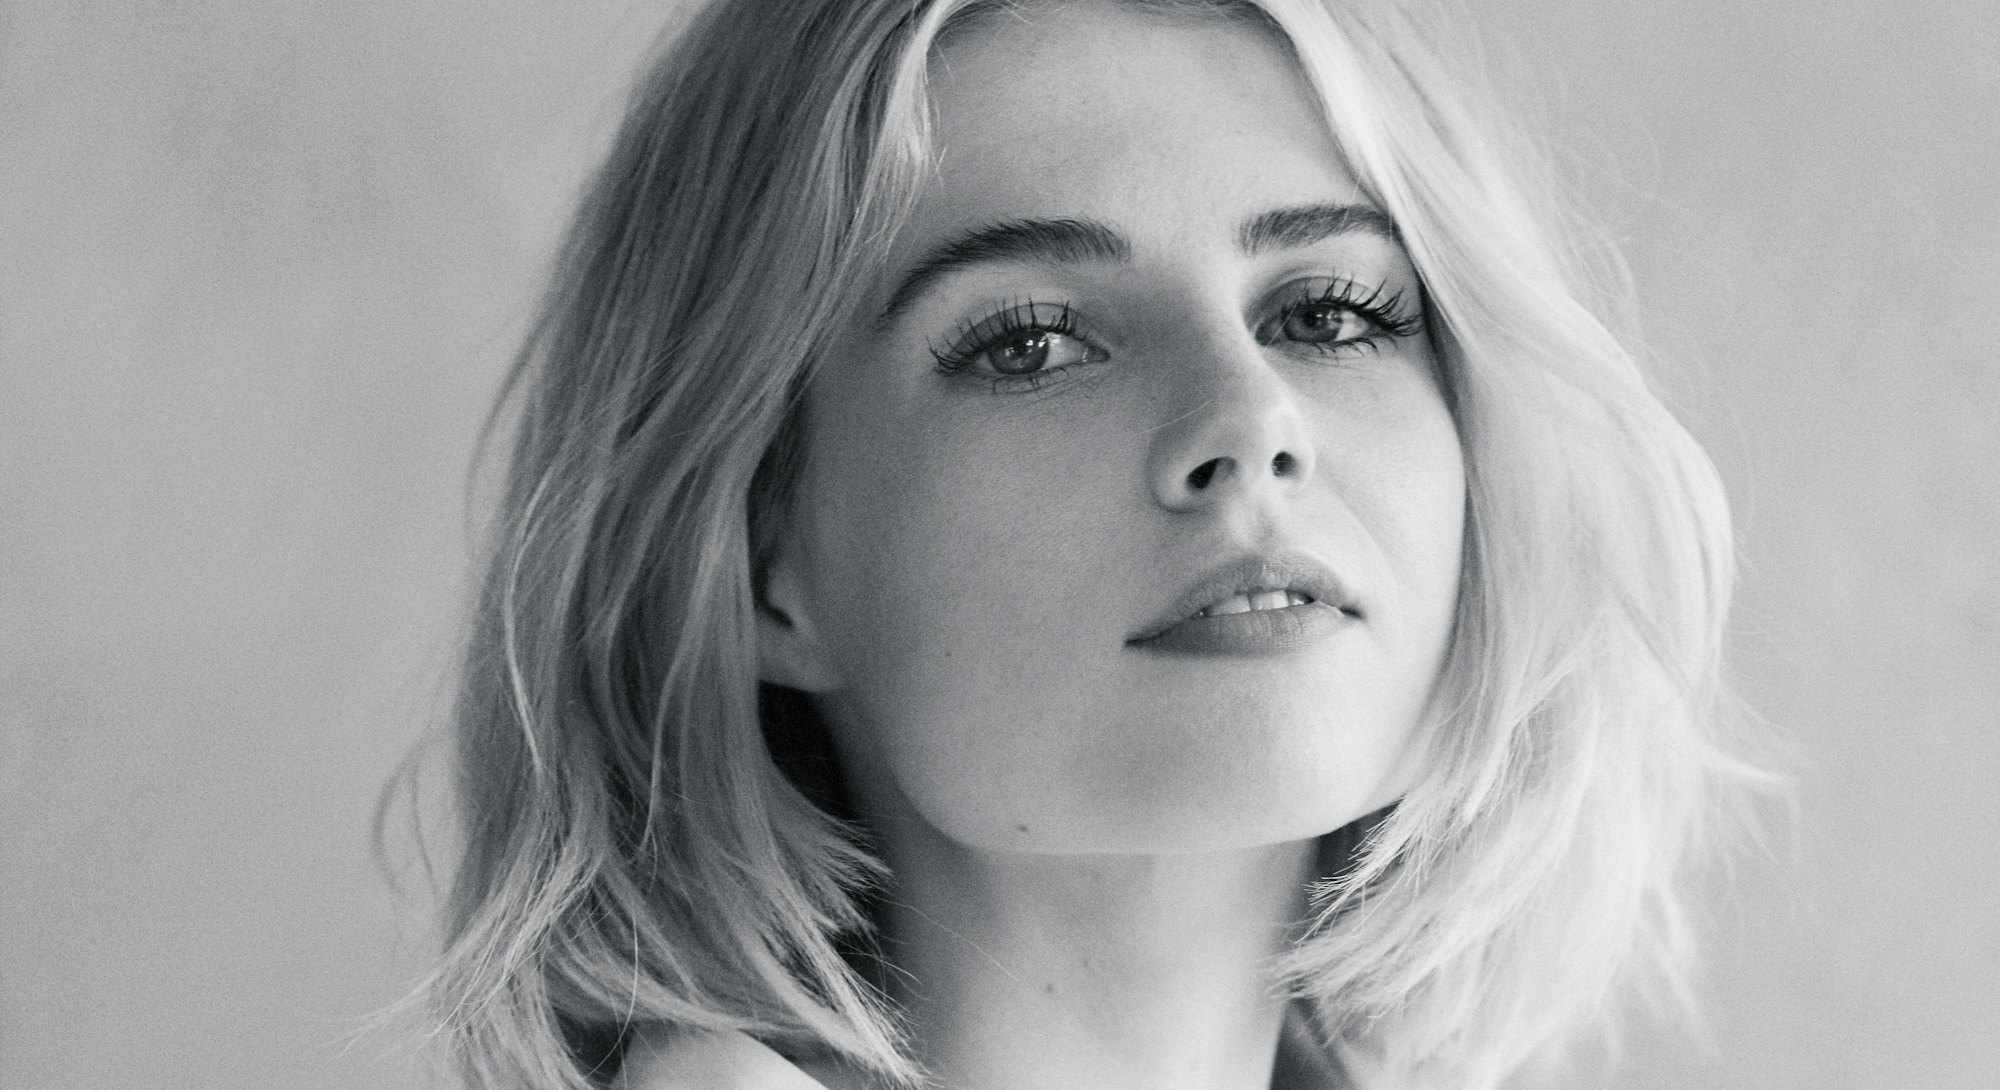 Lucy Boynton of 'The Ipcress File', 'Bohemian Rhapsody', and 'The Politician'.